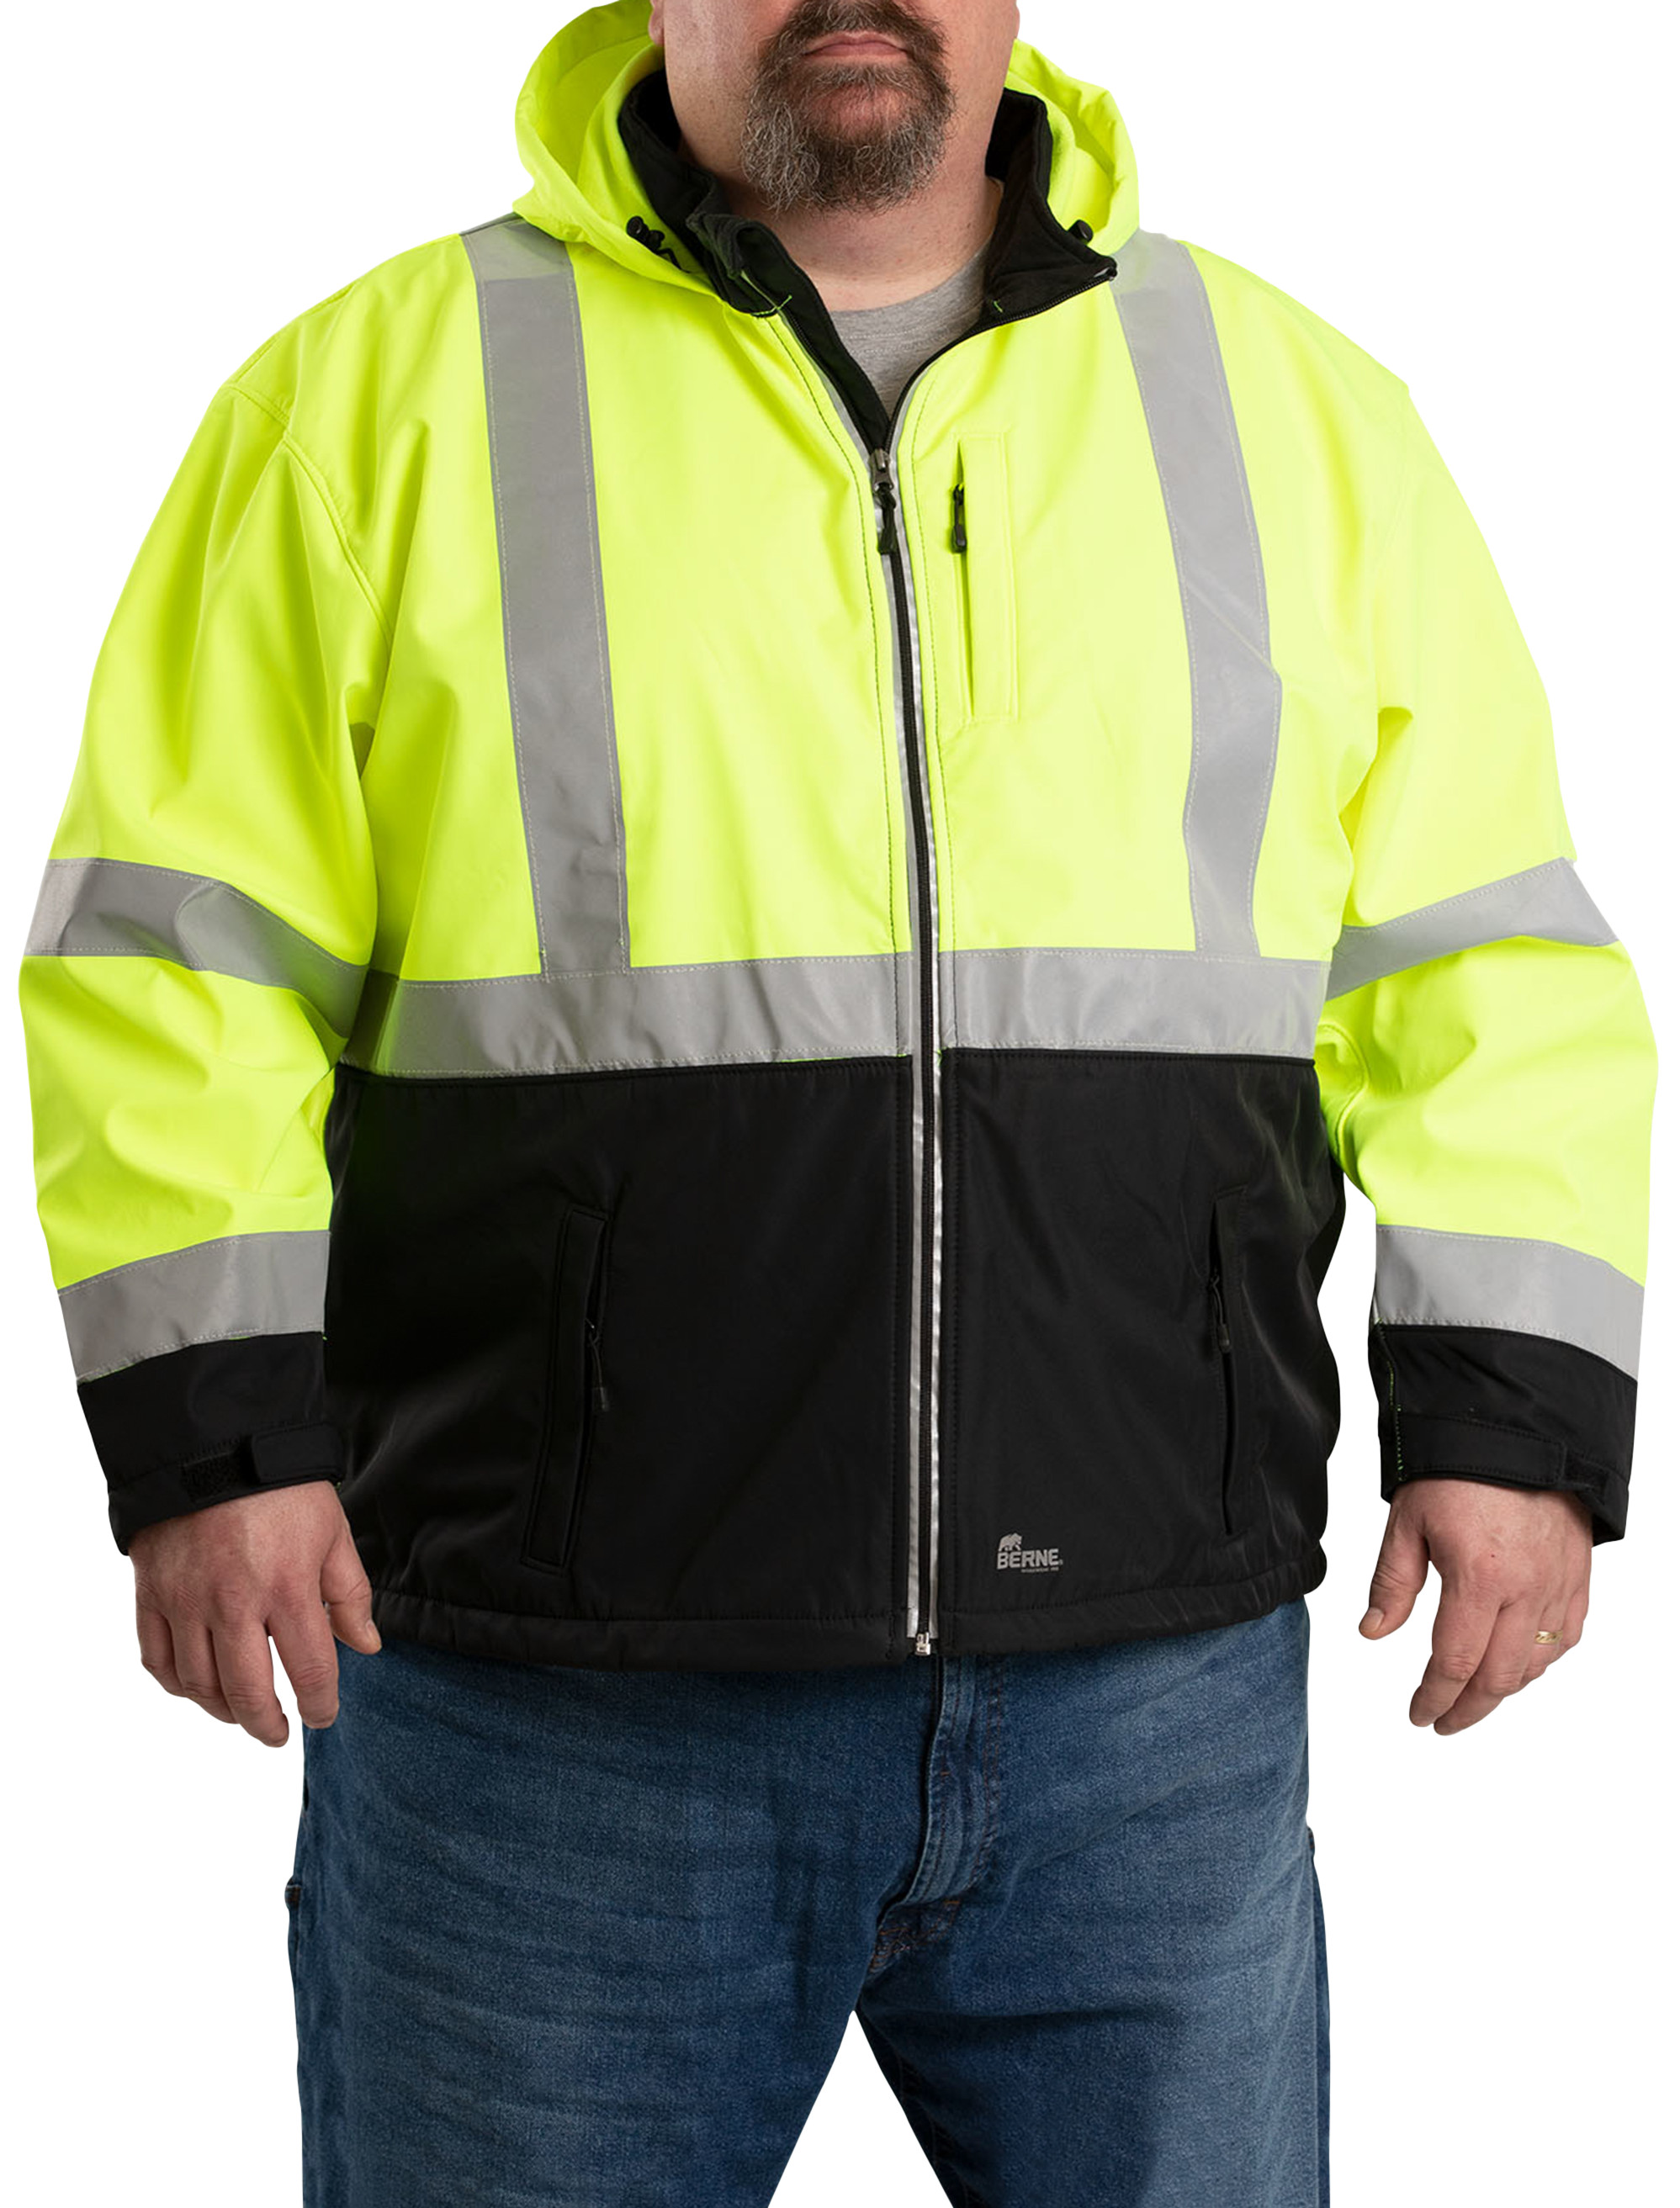 Hi-Visibility Colorblock Class 3 Hooded Jacket